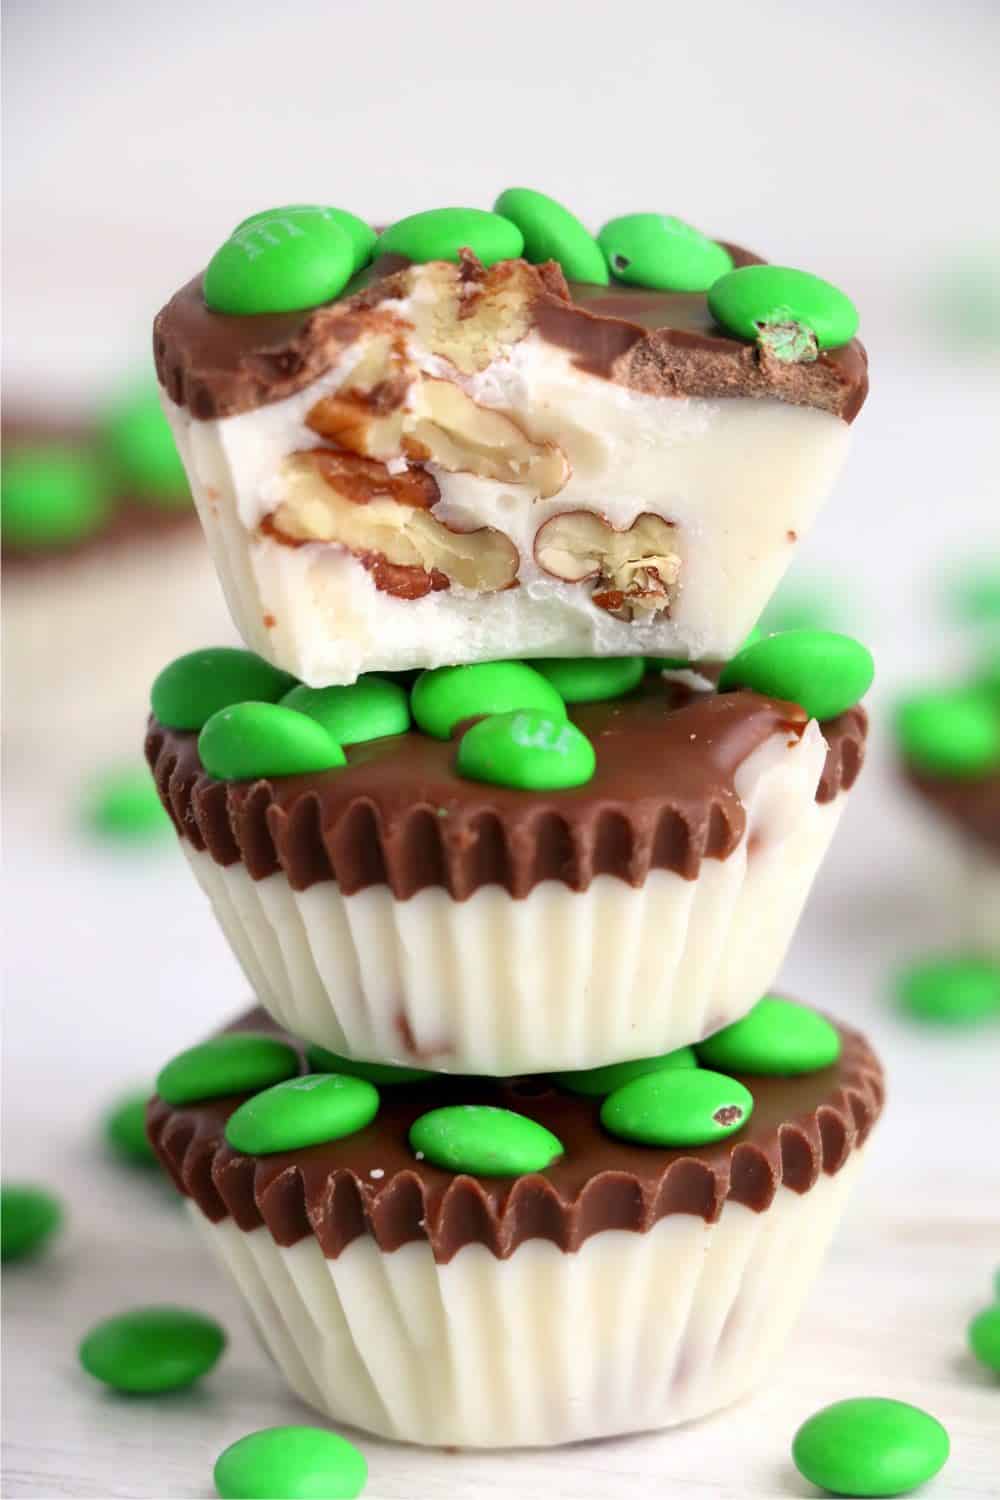 Chocolate Pecan Clusters piled up with green M&Ms candies. A bite is taken out of the chocolate candy on top.